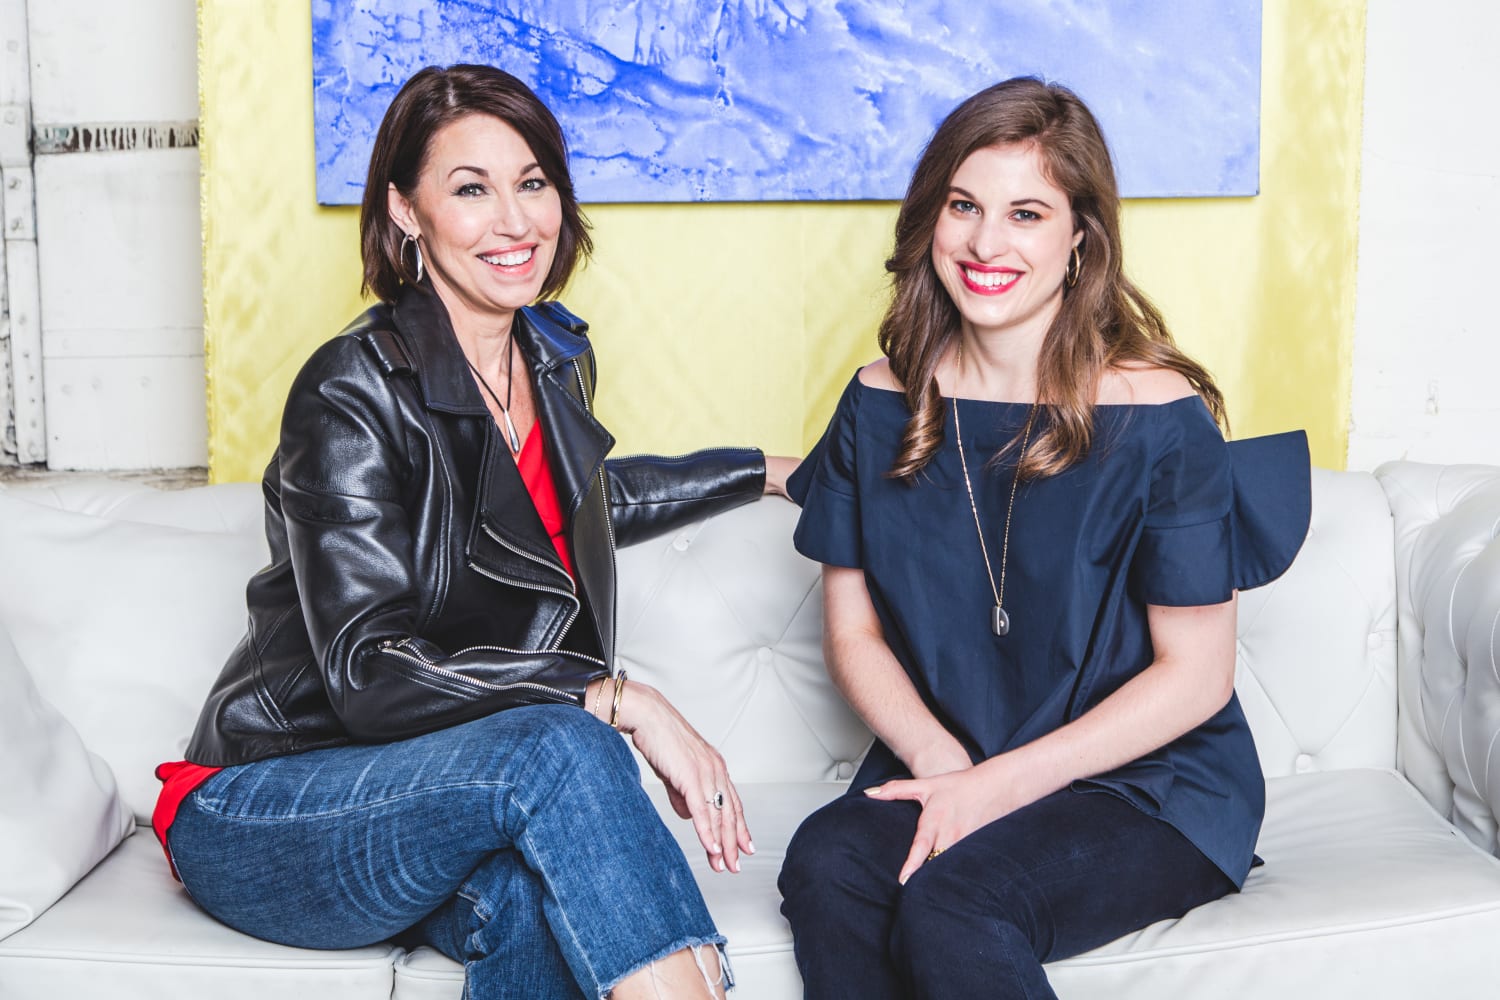 How this mom-daughter duo is giving women confidence through fashion